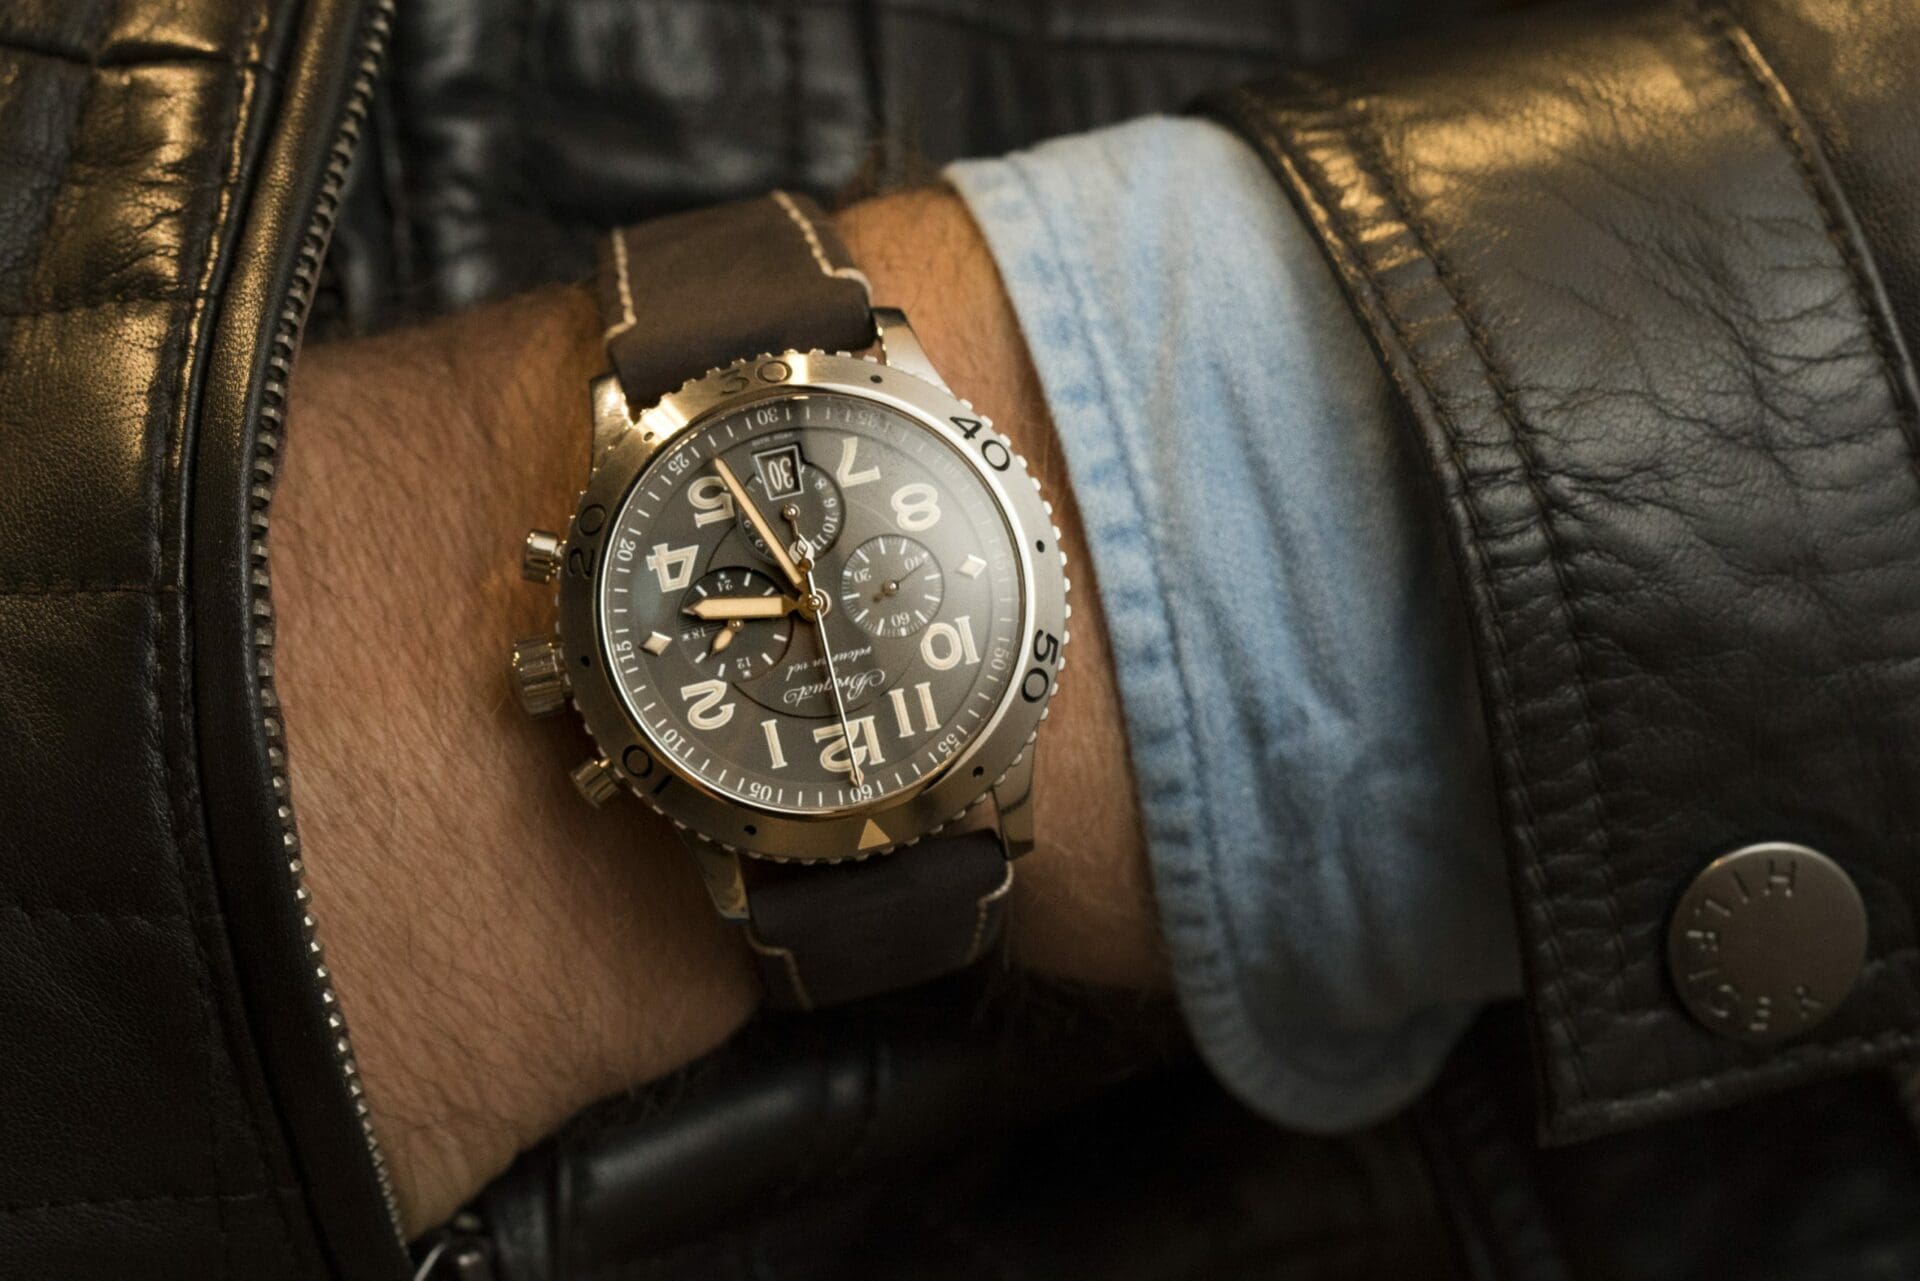 EDITOR’S PICK: The other side of Breguet – the Type XXI 3817